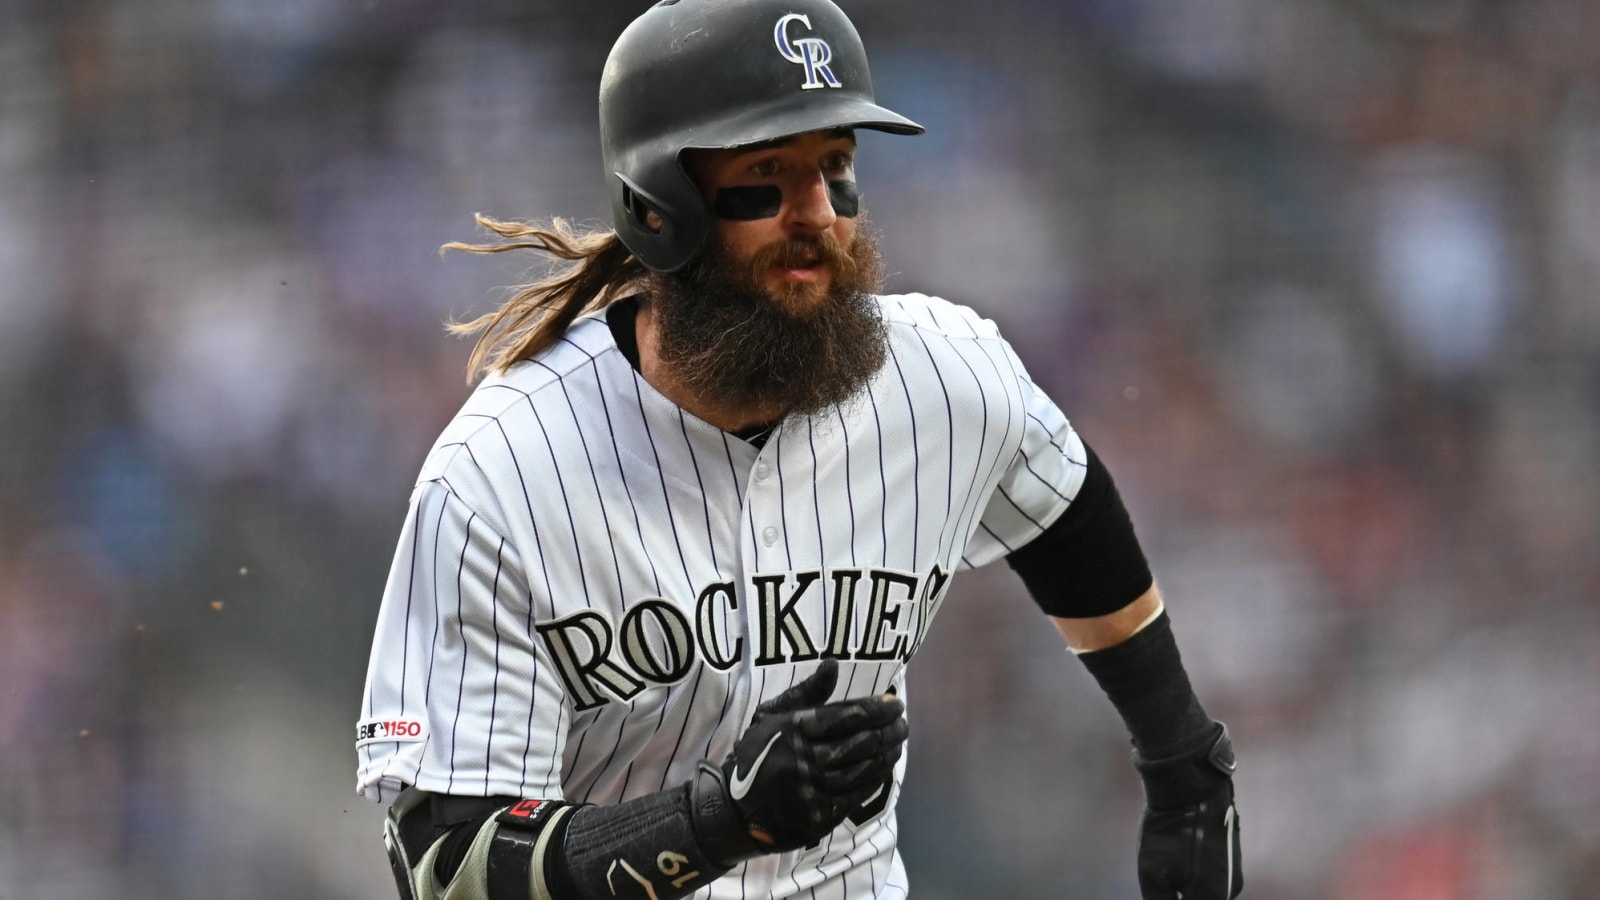 Rockies sign Charlie Blackmon to extension through at least 2021